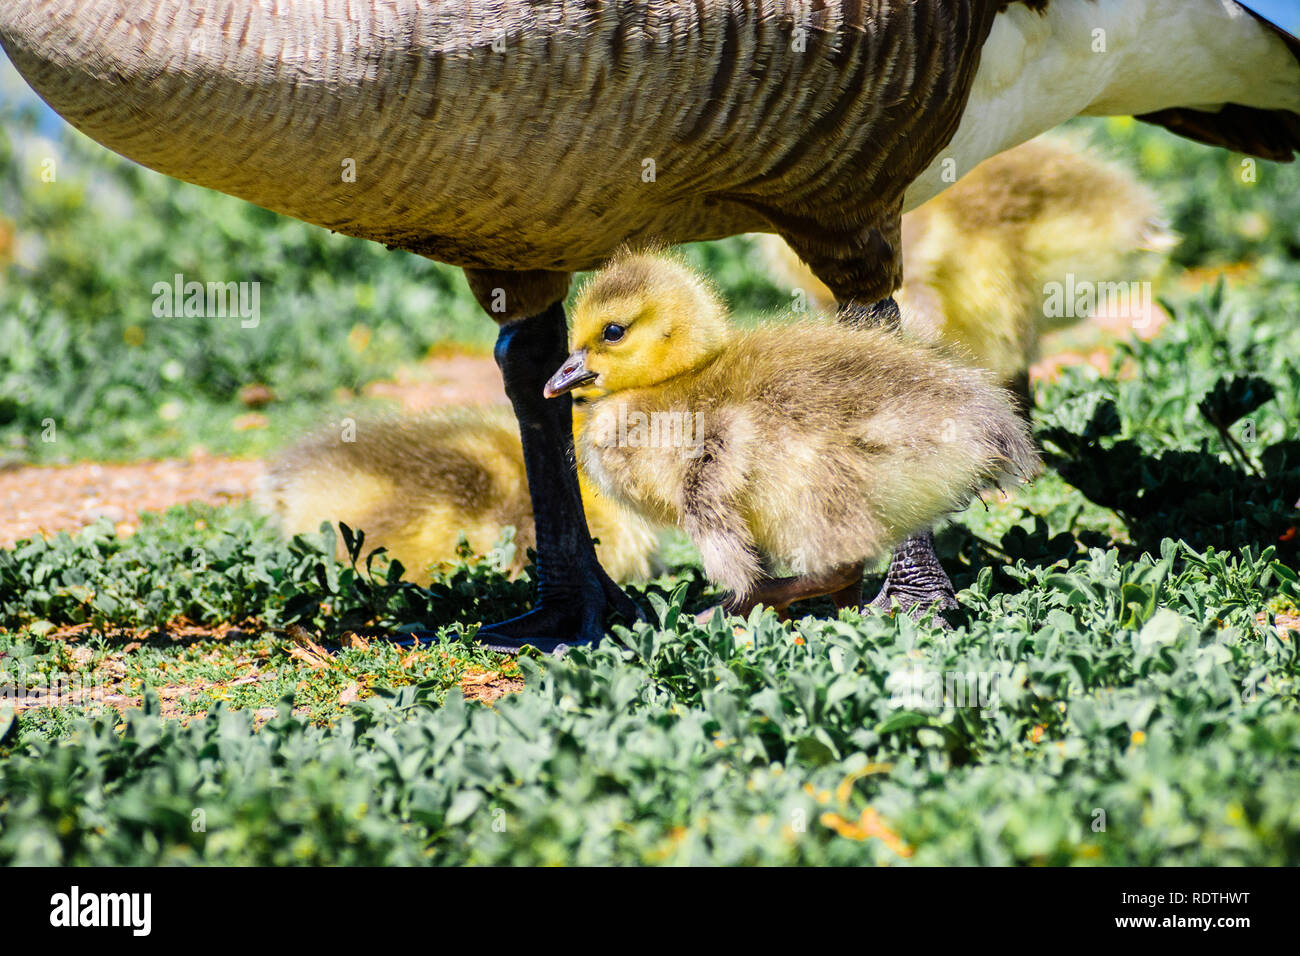 Canada Goose (Branta canadensis) new born chick sitting close to its mother, San Francisco bay area, California Stock Photo